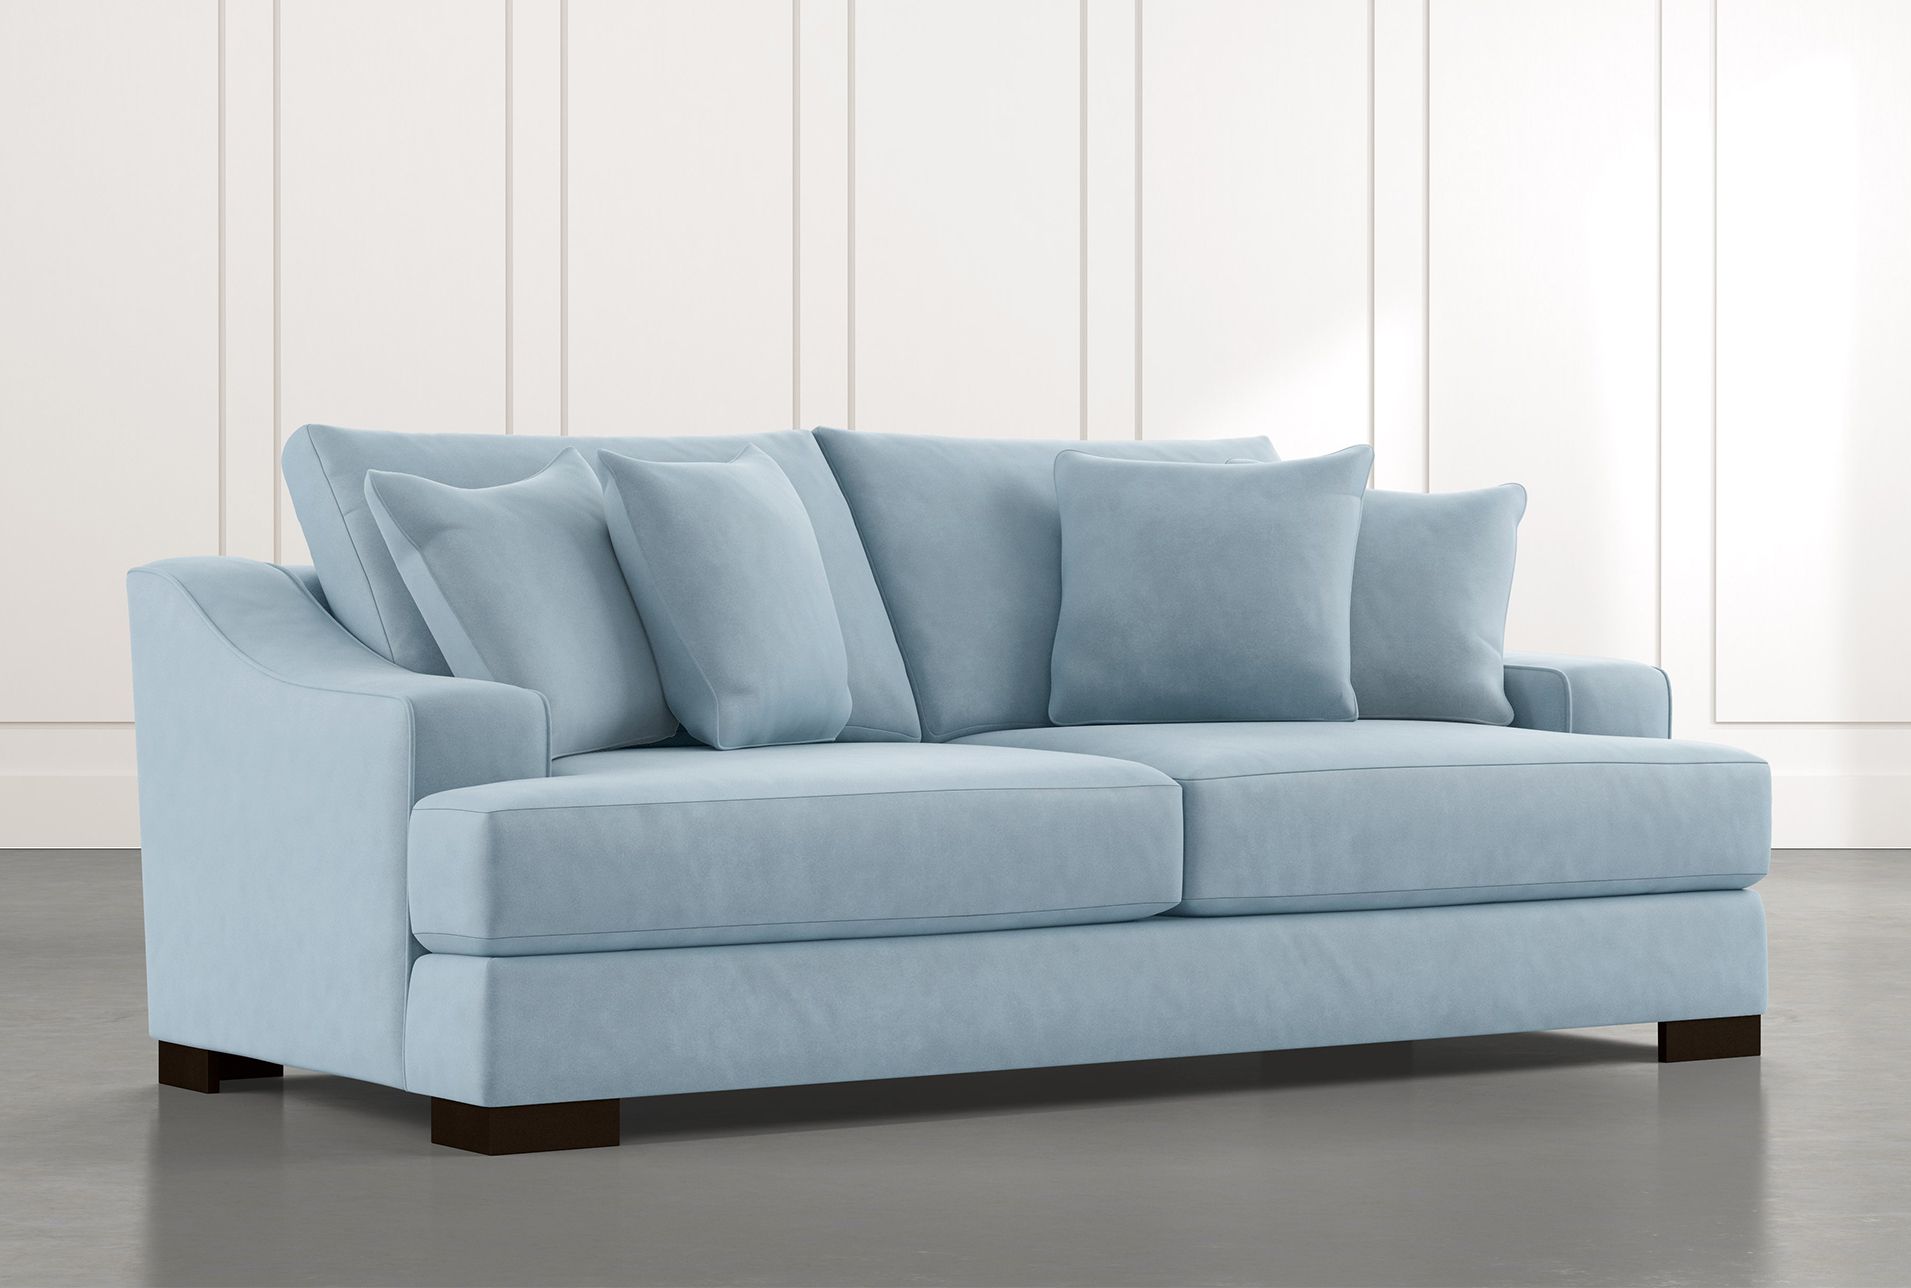 Lodge 96" Light Blue Sofa | Living Spaces Throughout Sofas In Blue (Gallery 16 of 20)